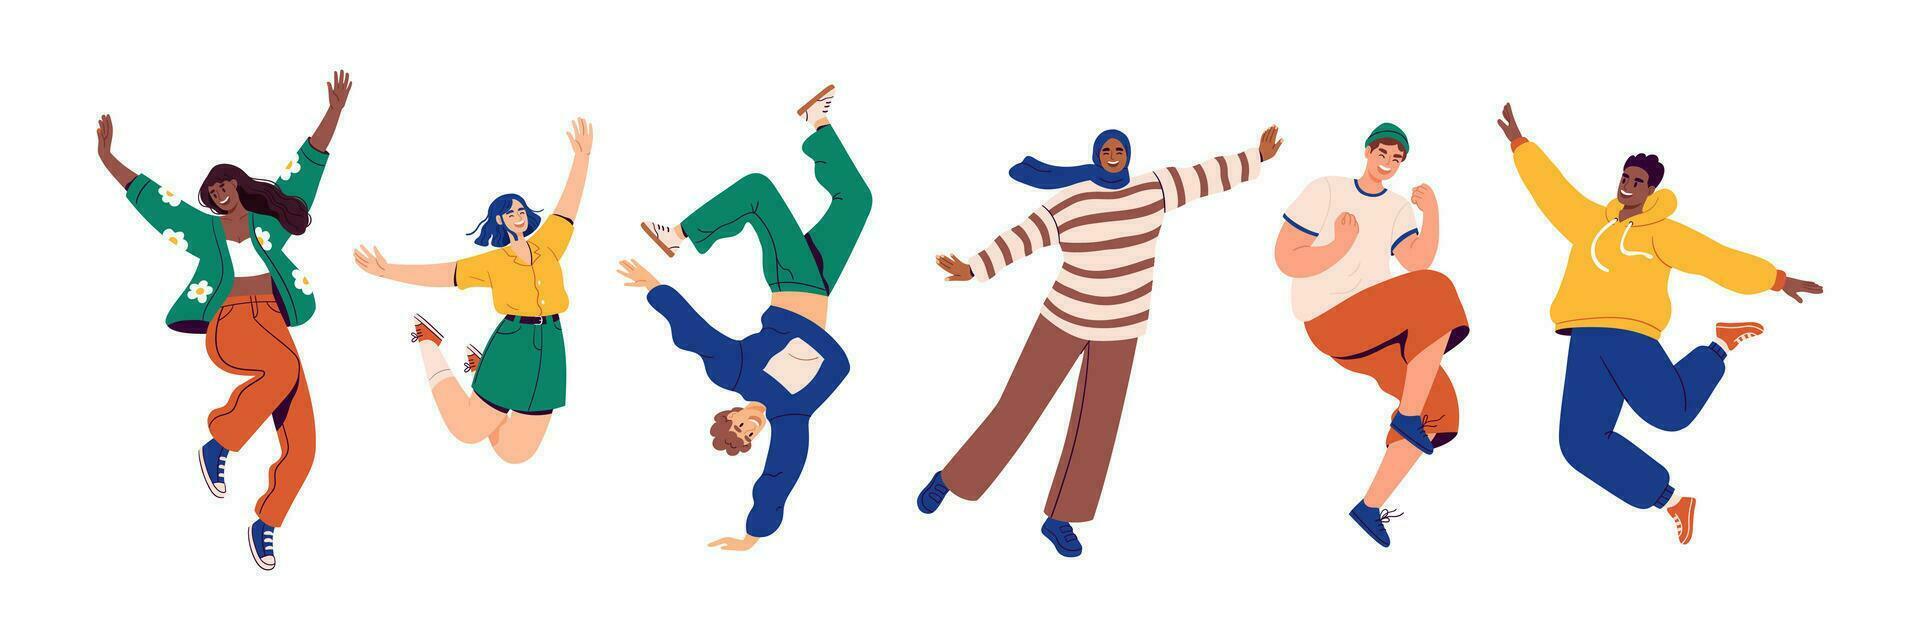 Happy people jumping from joy in modern clothes. Young people celebrate success, achievement. Flat vector illustration.